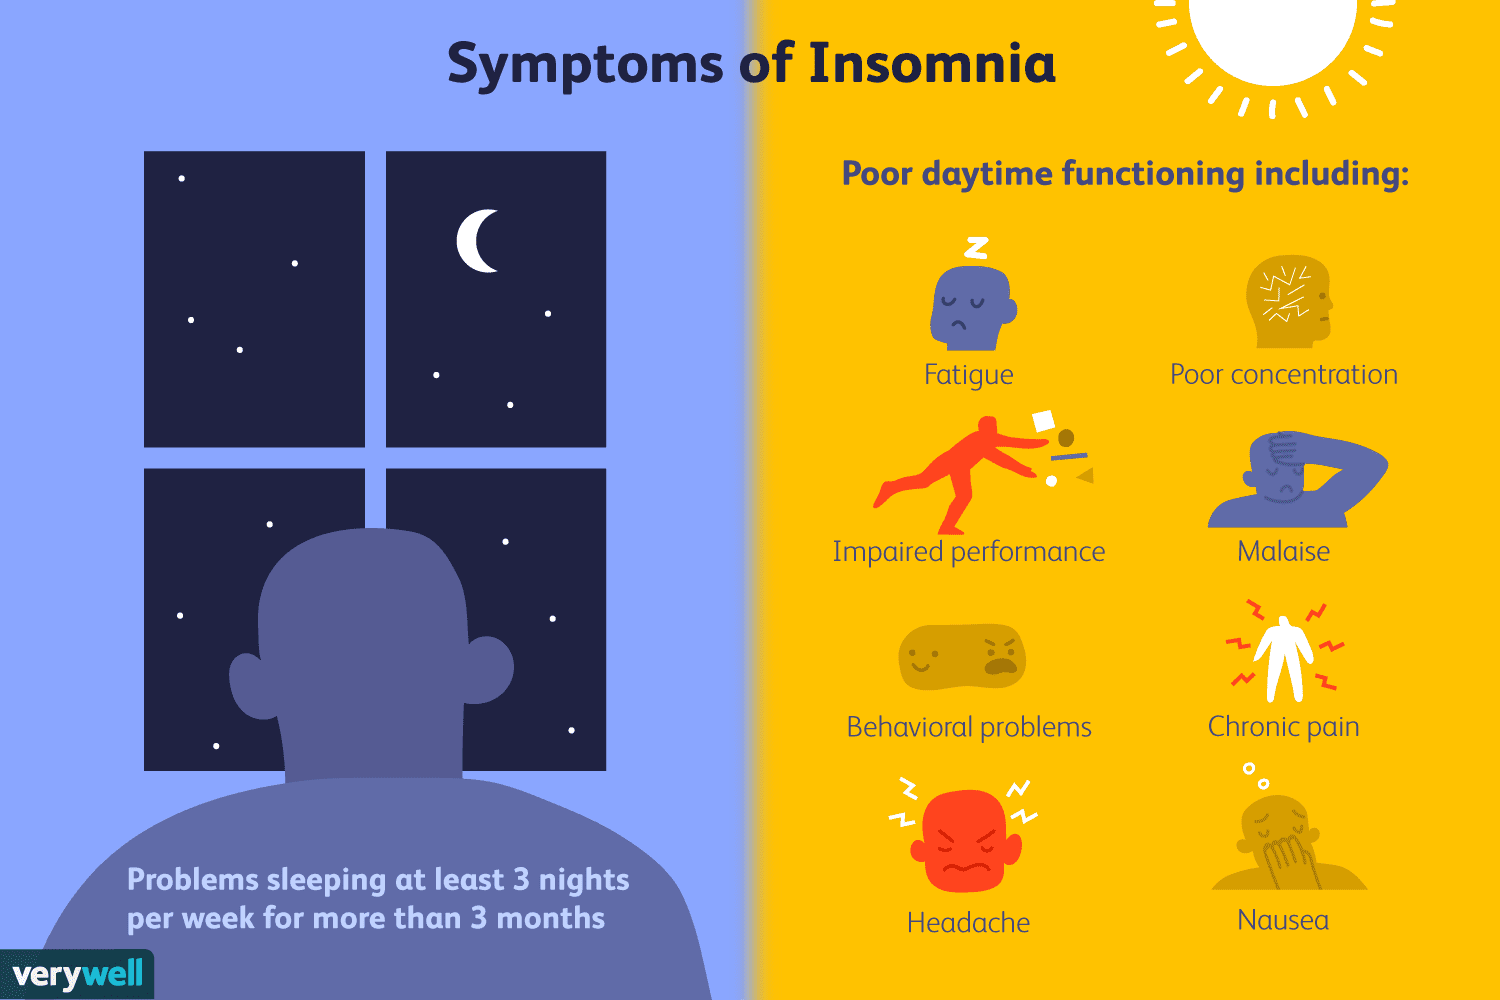 Suffering From Insomnia? These Tips Can Help